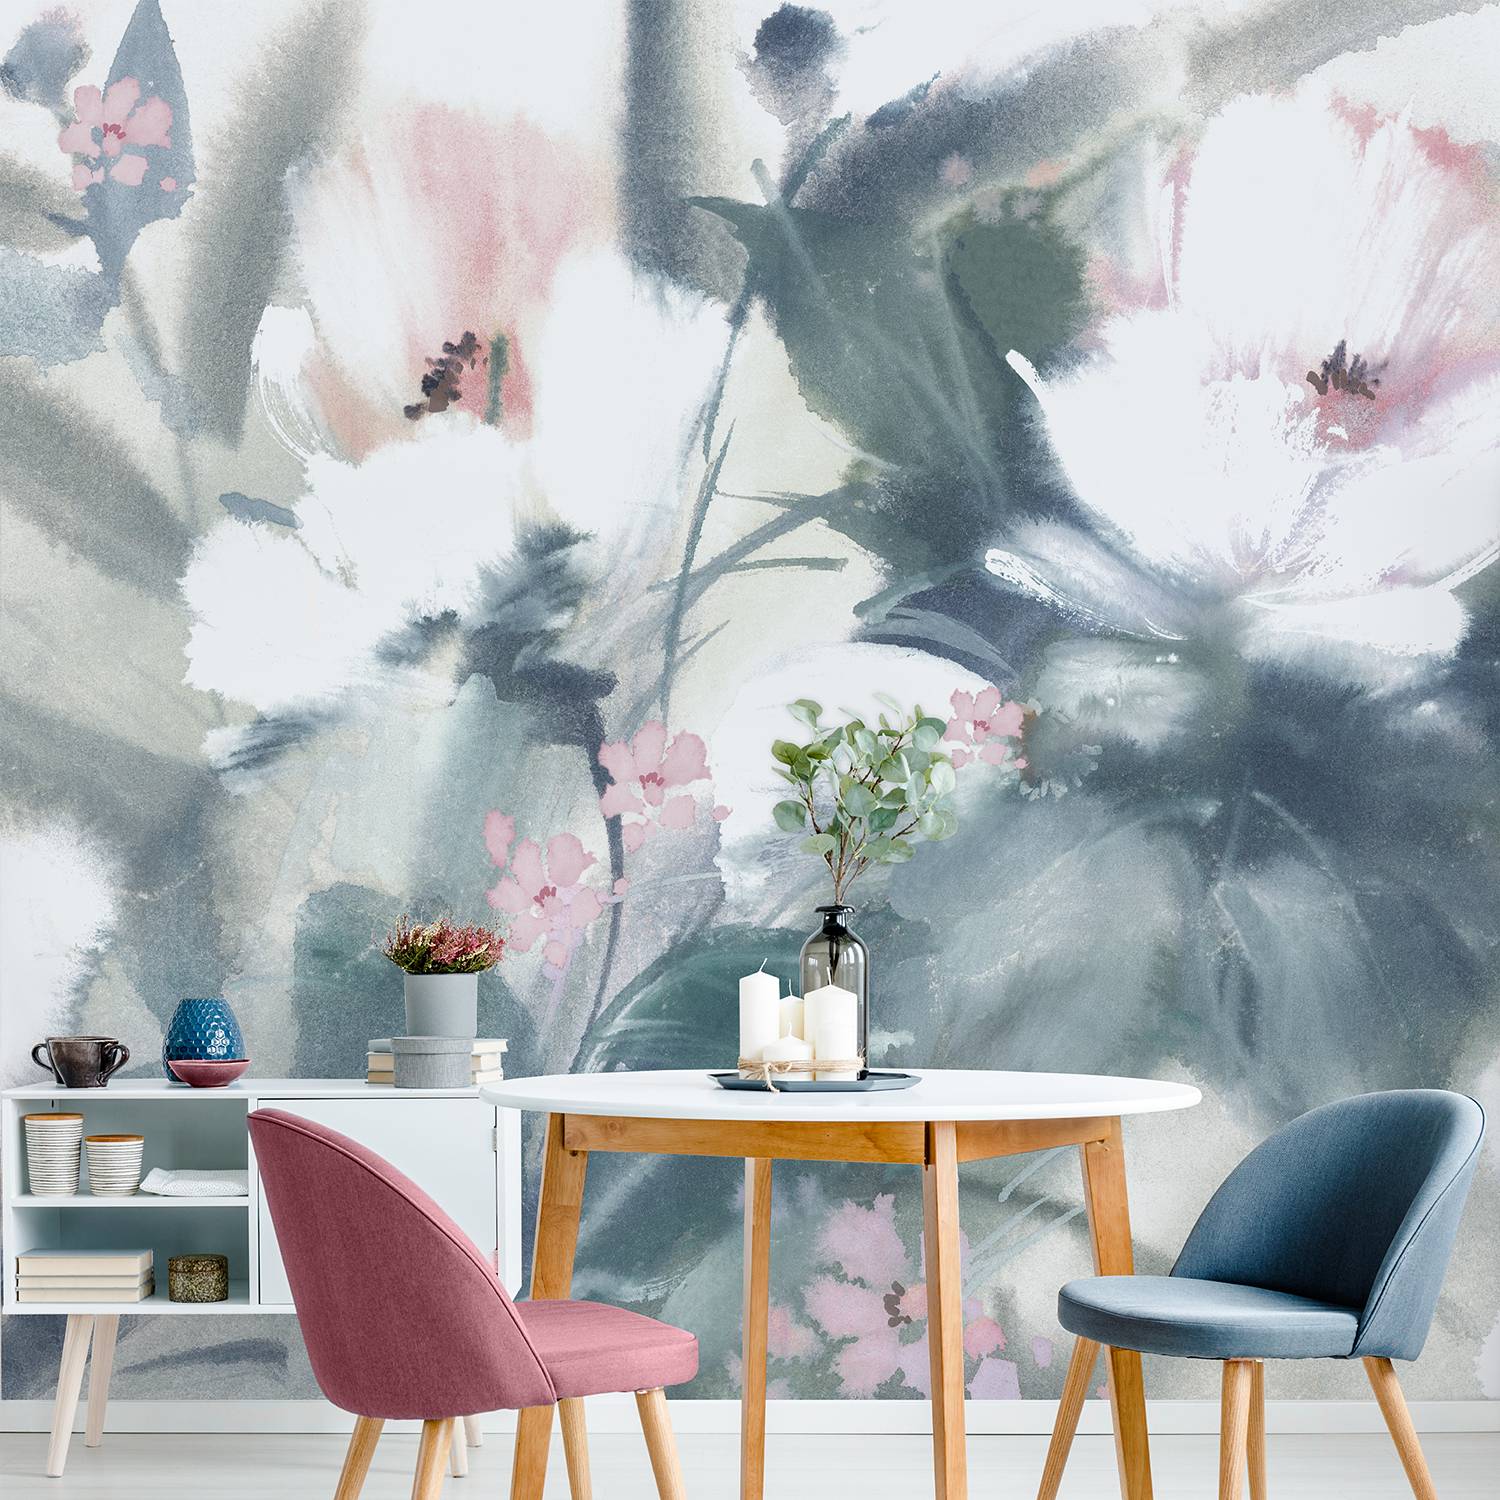 Fototapete Expressive Floral Pastel von Art for the Home